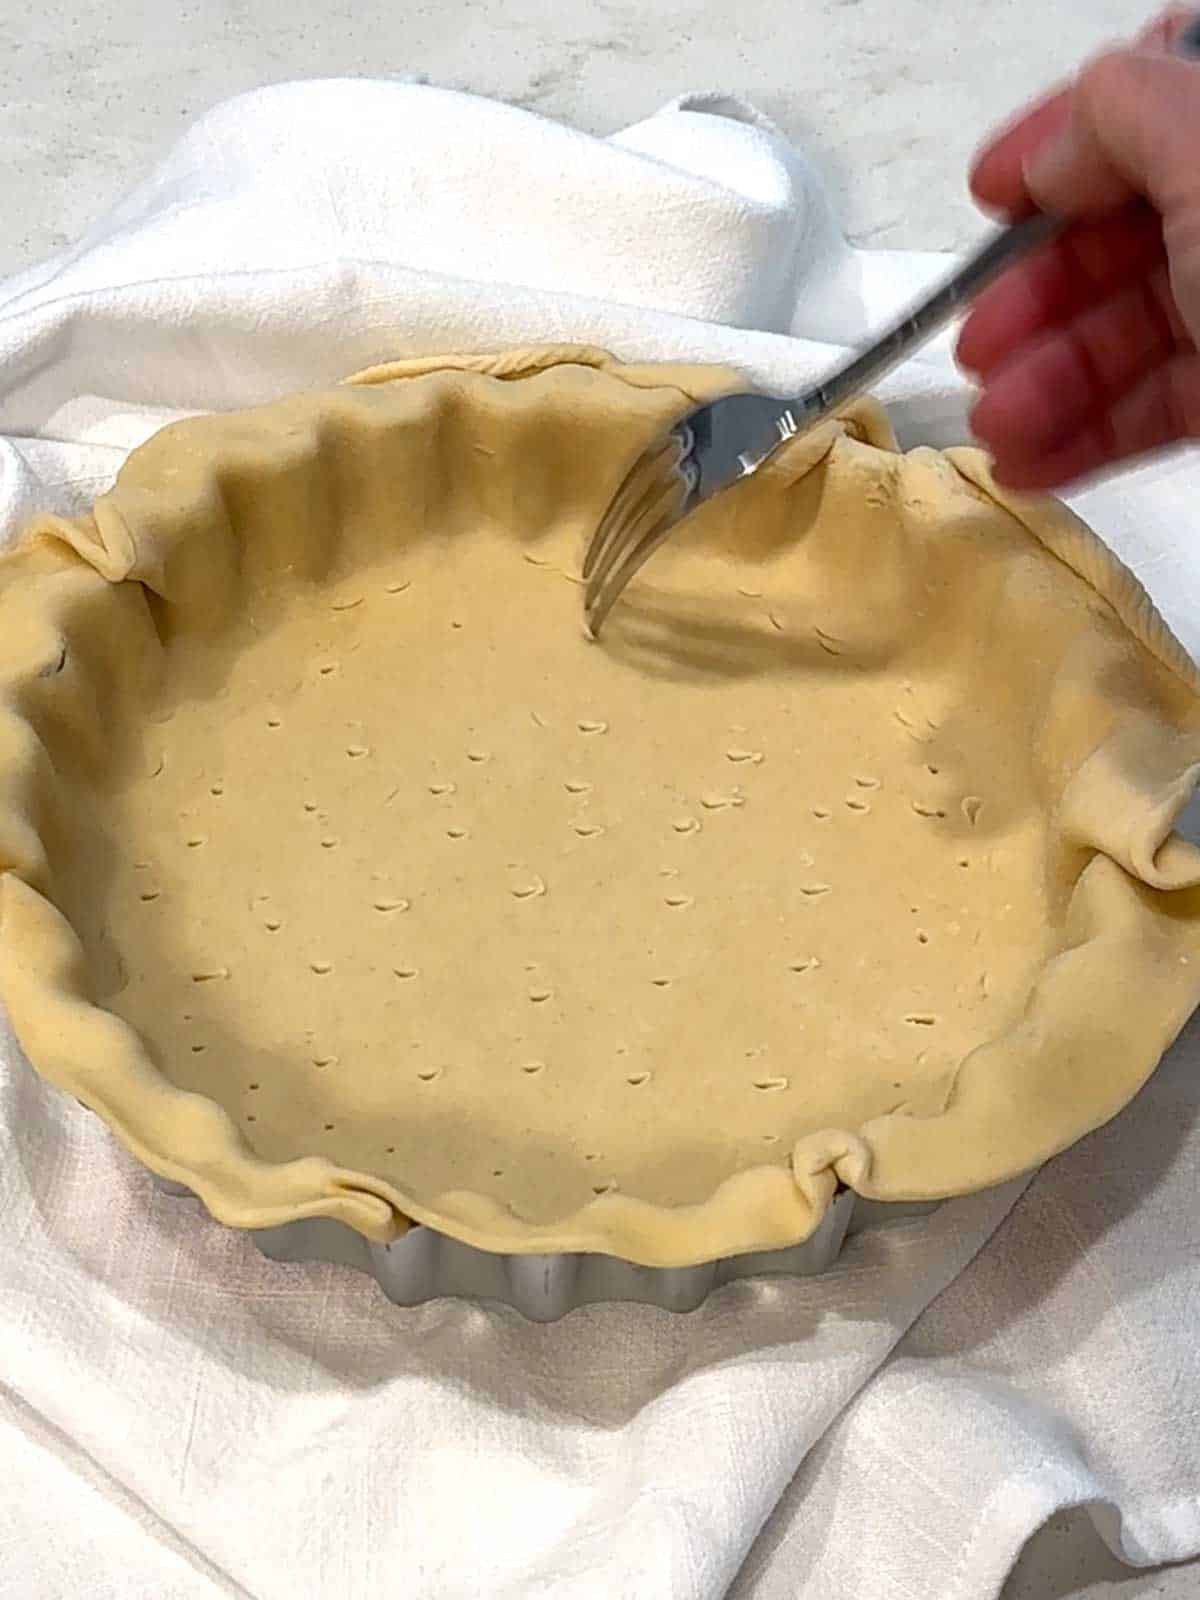 Piercing the botton of the pastry with a fork.